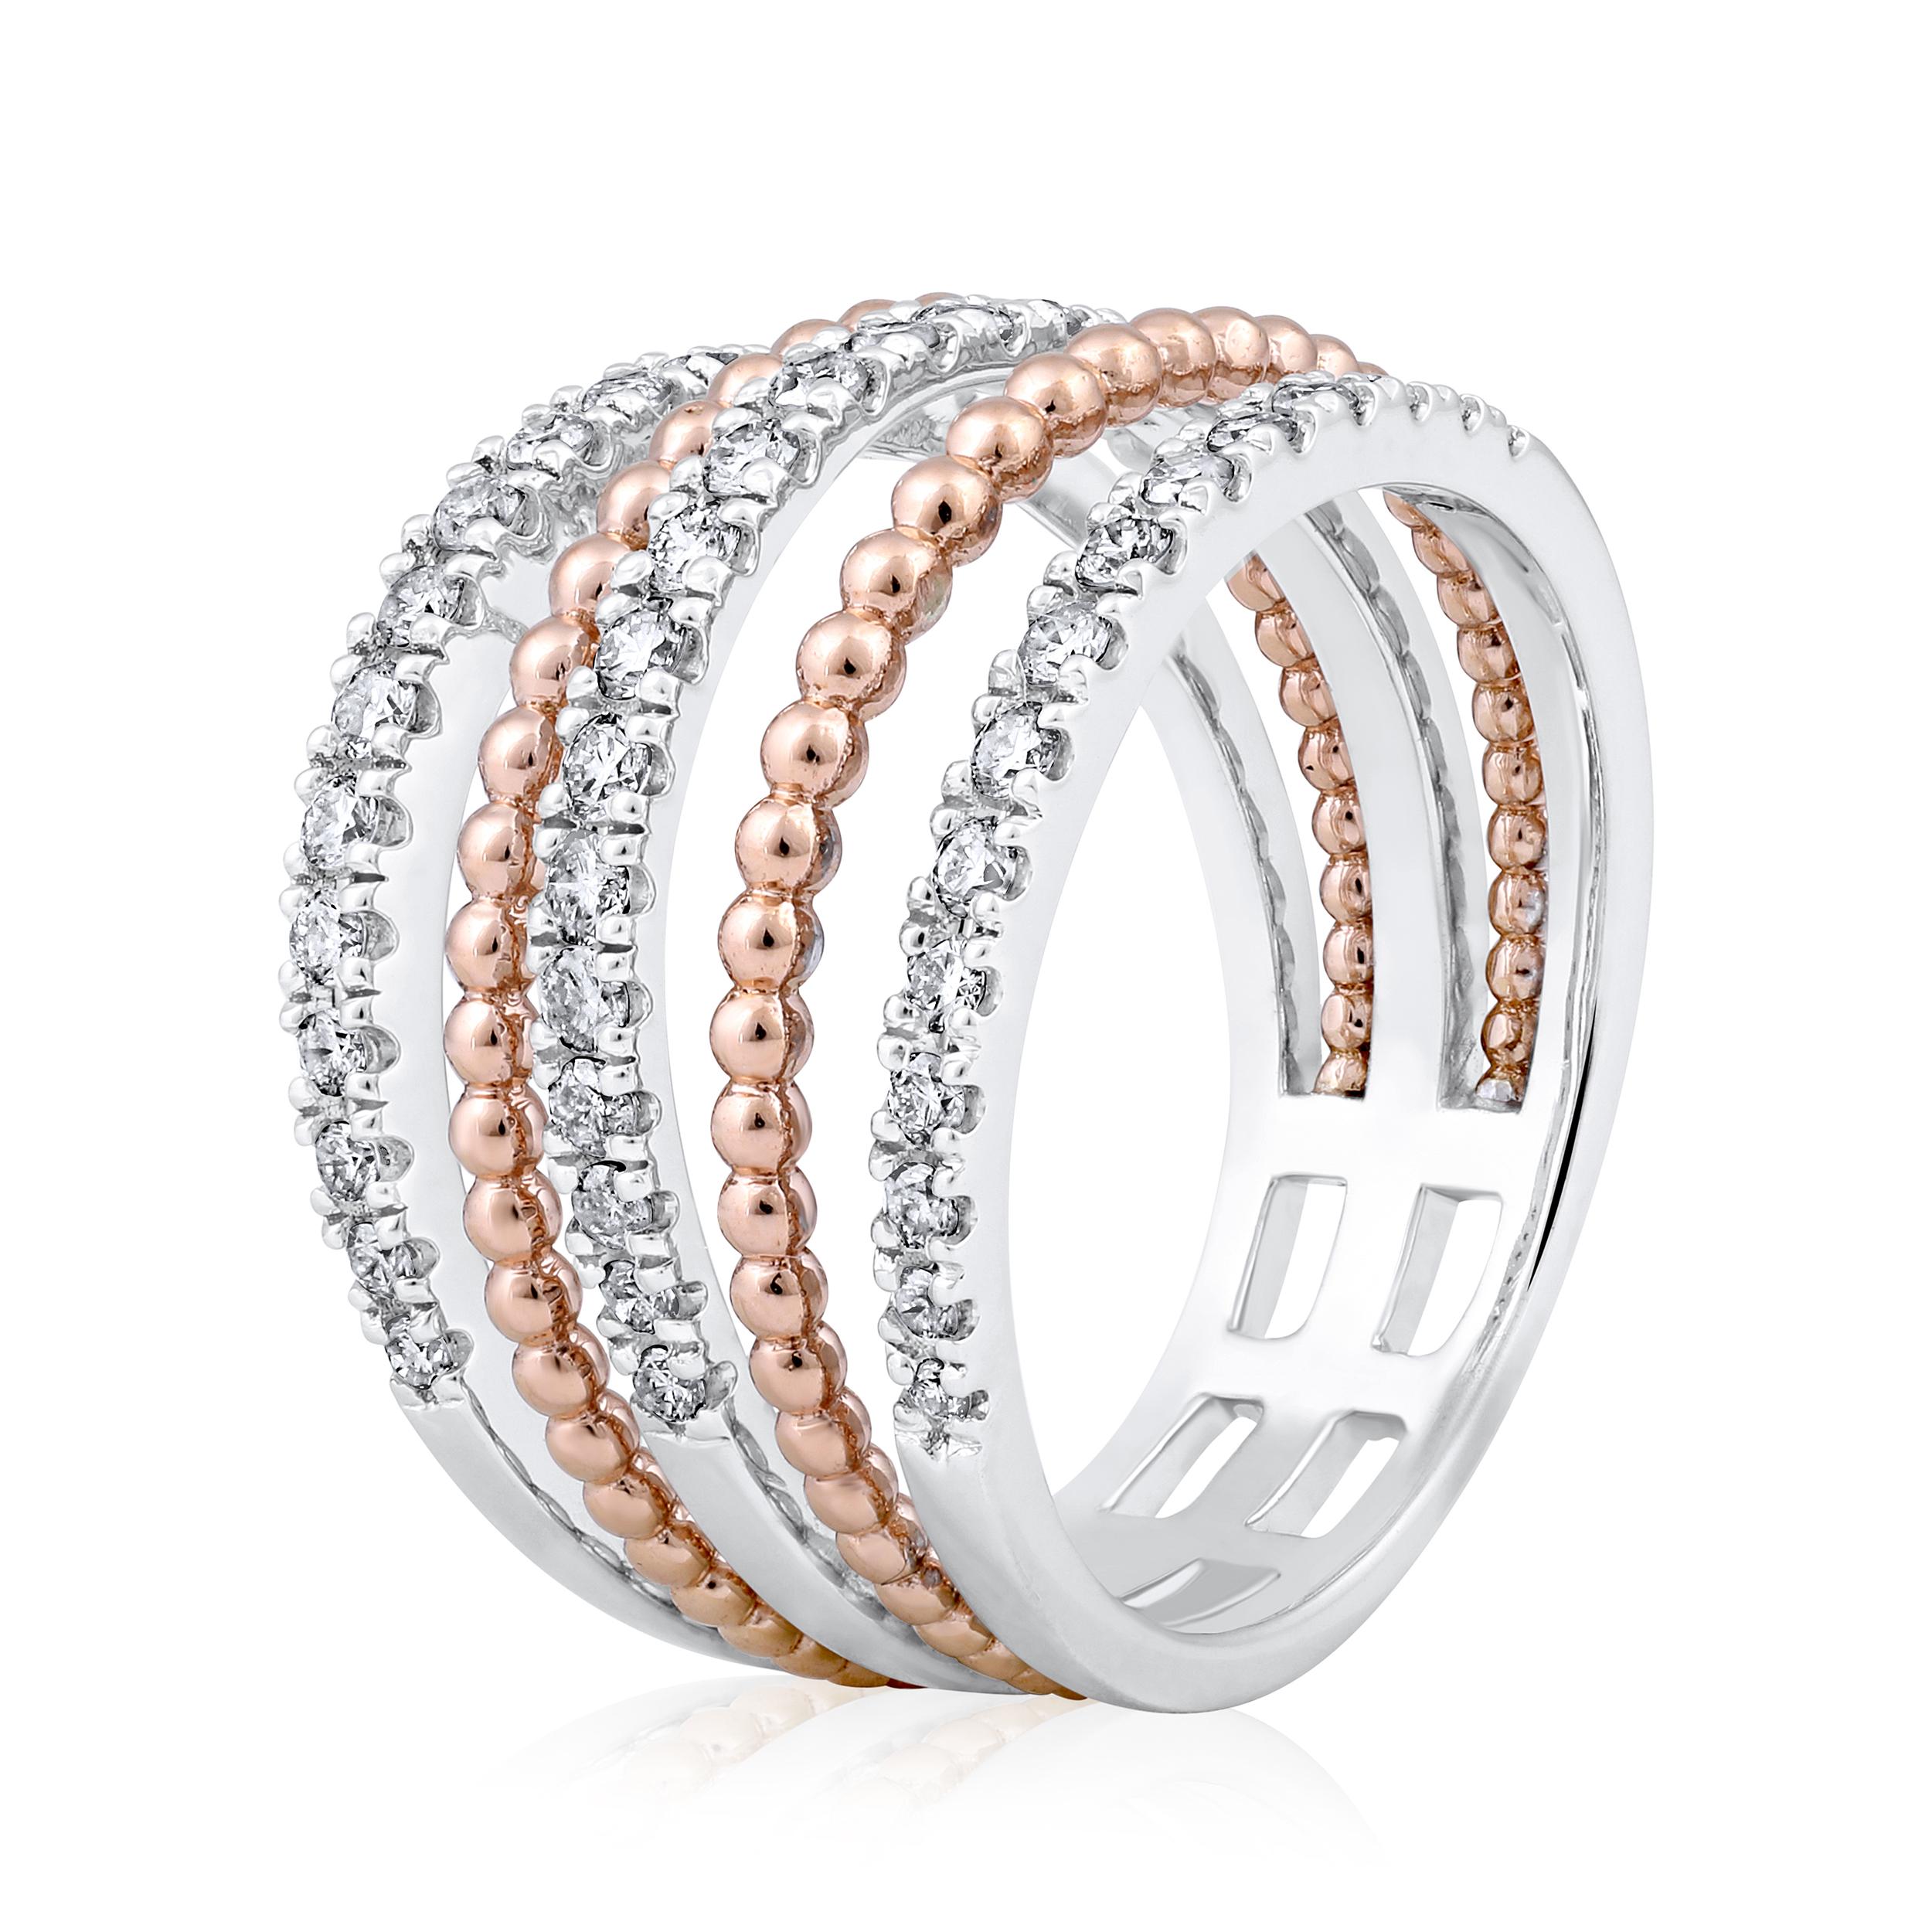 Ring Size: US 8 

Crafted in 7.08 grams of 14K White Gold and 14K Rose Gold, the ring contains 47 stones of Round Diamonds with a total of 0.69 carat in F-G color and I1-I2 clarity.

CONTEMPORARY AND TIMELESS ESSENCE: Crafted in 14-karat/18-karat